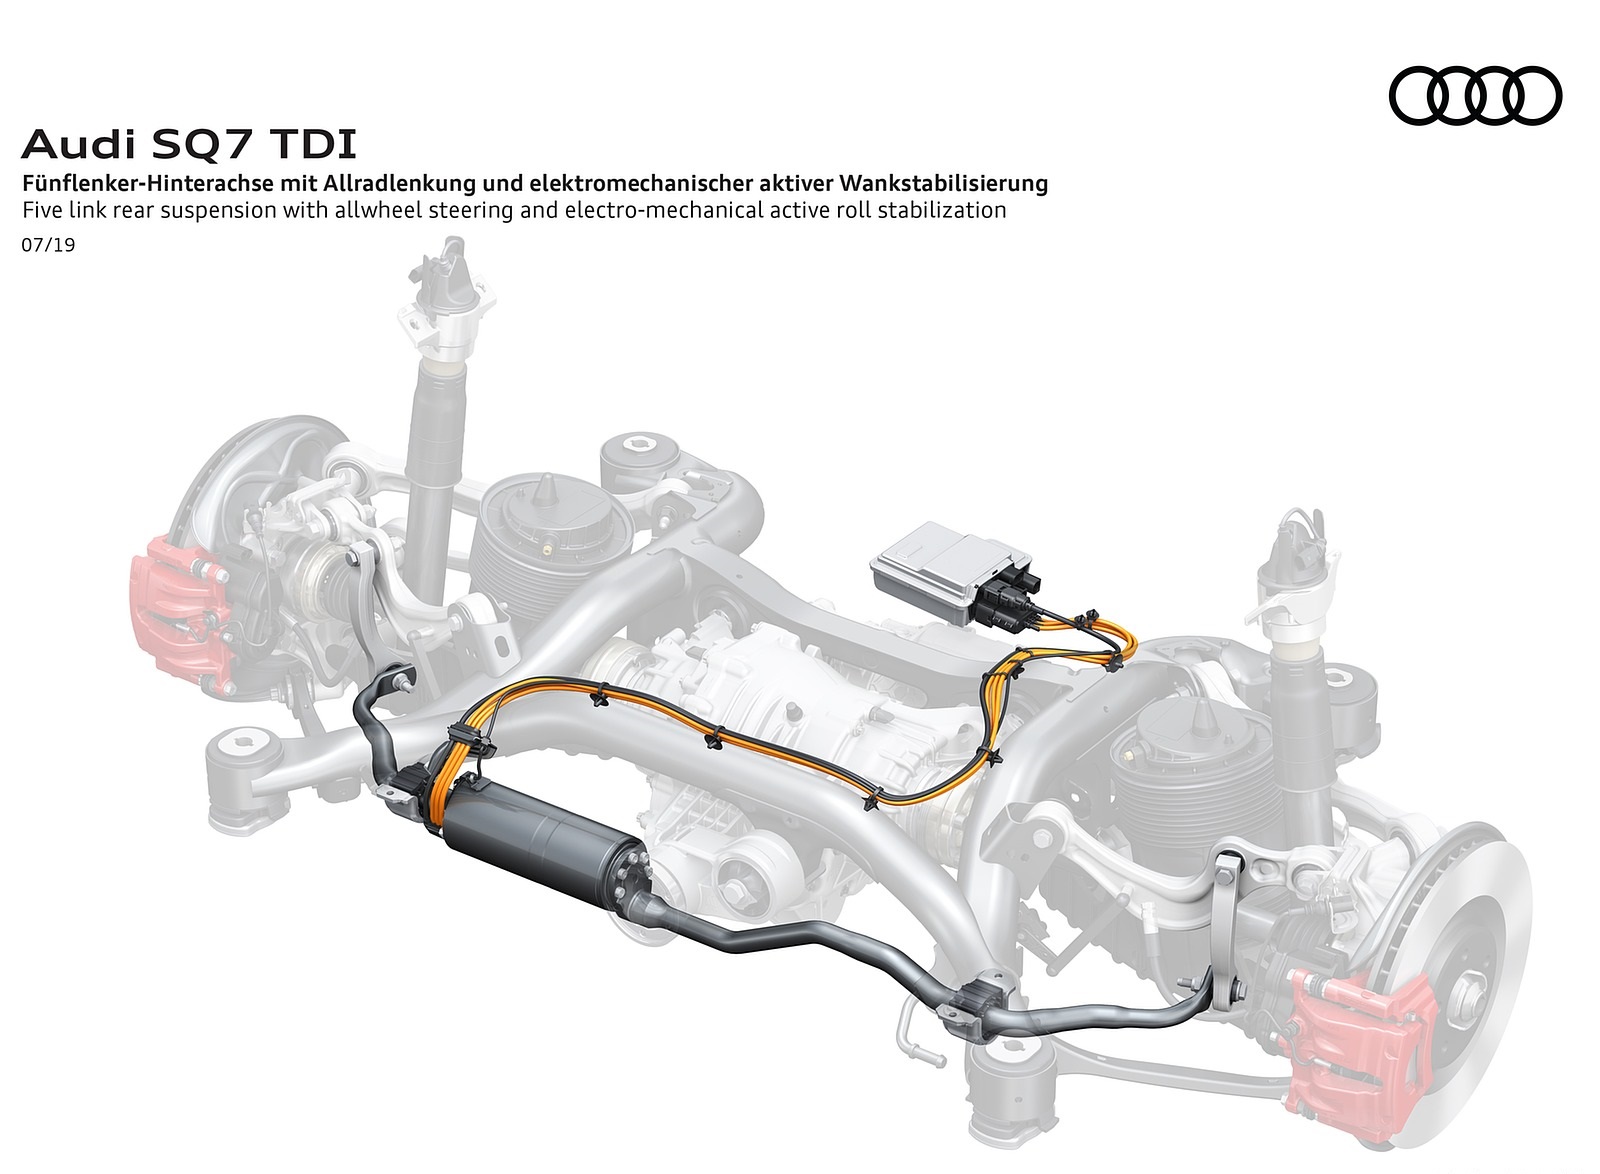 2020 Audi SQ7 TDI Five link rear suspension with allwheel stearing and electro-mechanical aktive roll stabilization Wallpapers #138 of 140